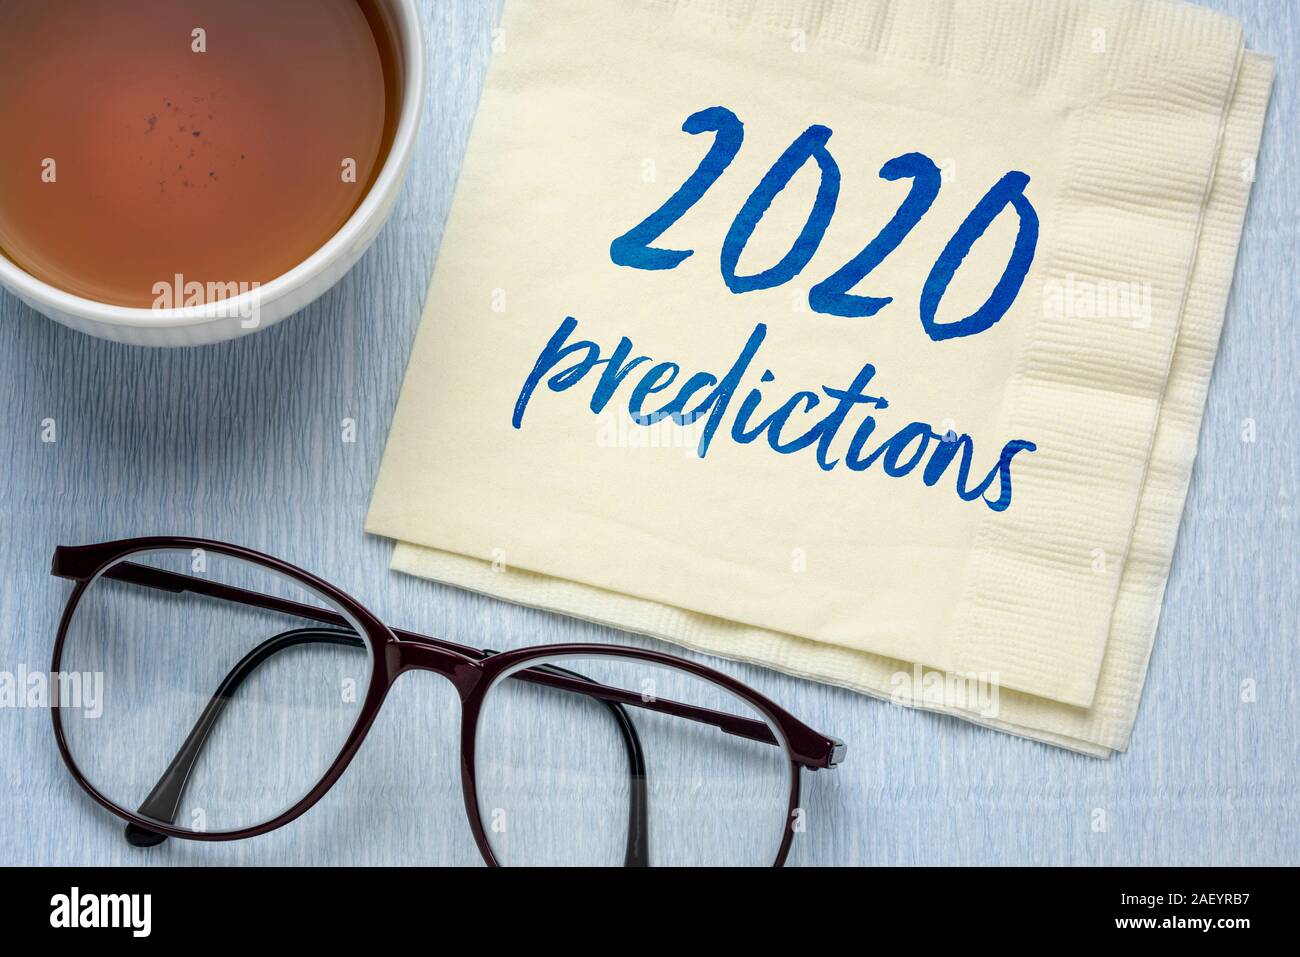 2020 predictions - handwriting on a napkin with a cup of tea, business and financial trends and expectations in New Year Stock Photo